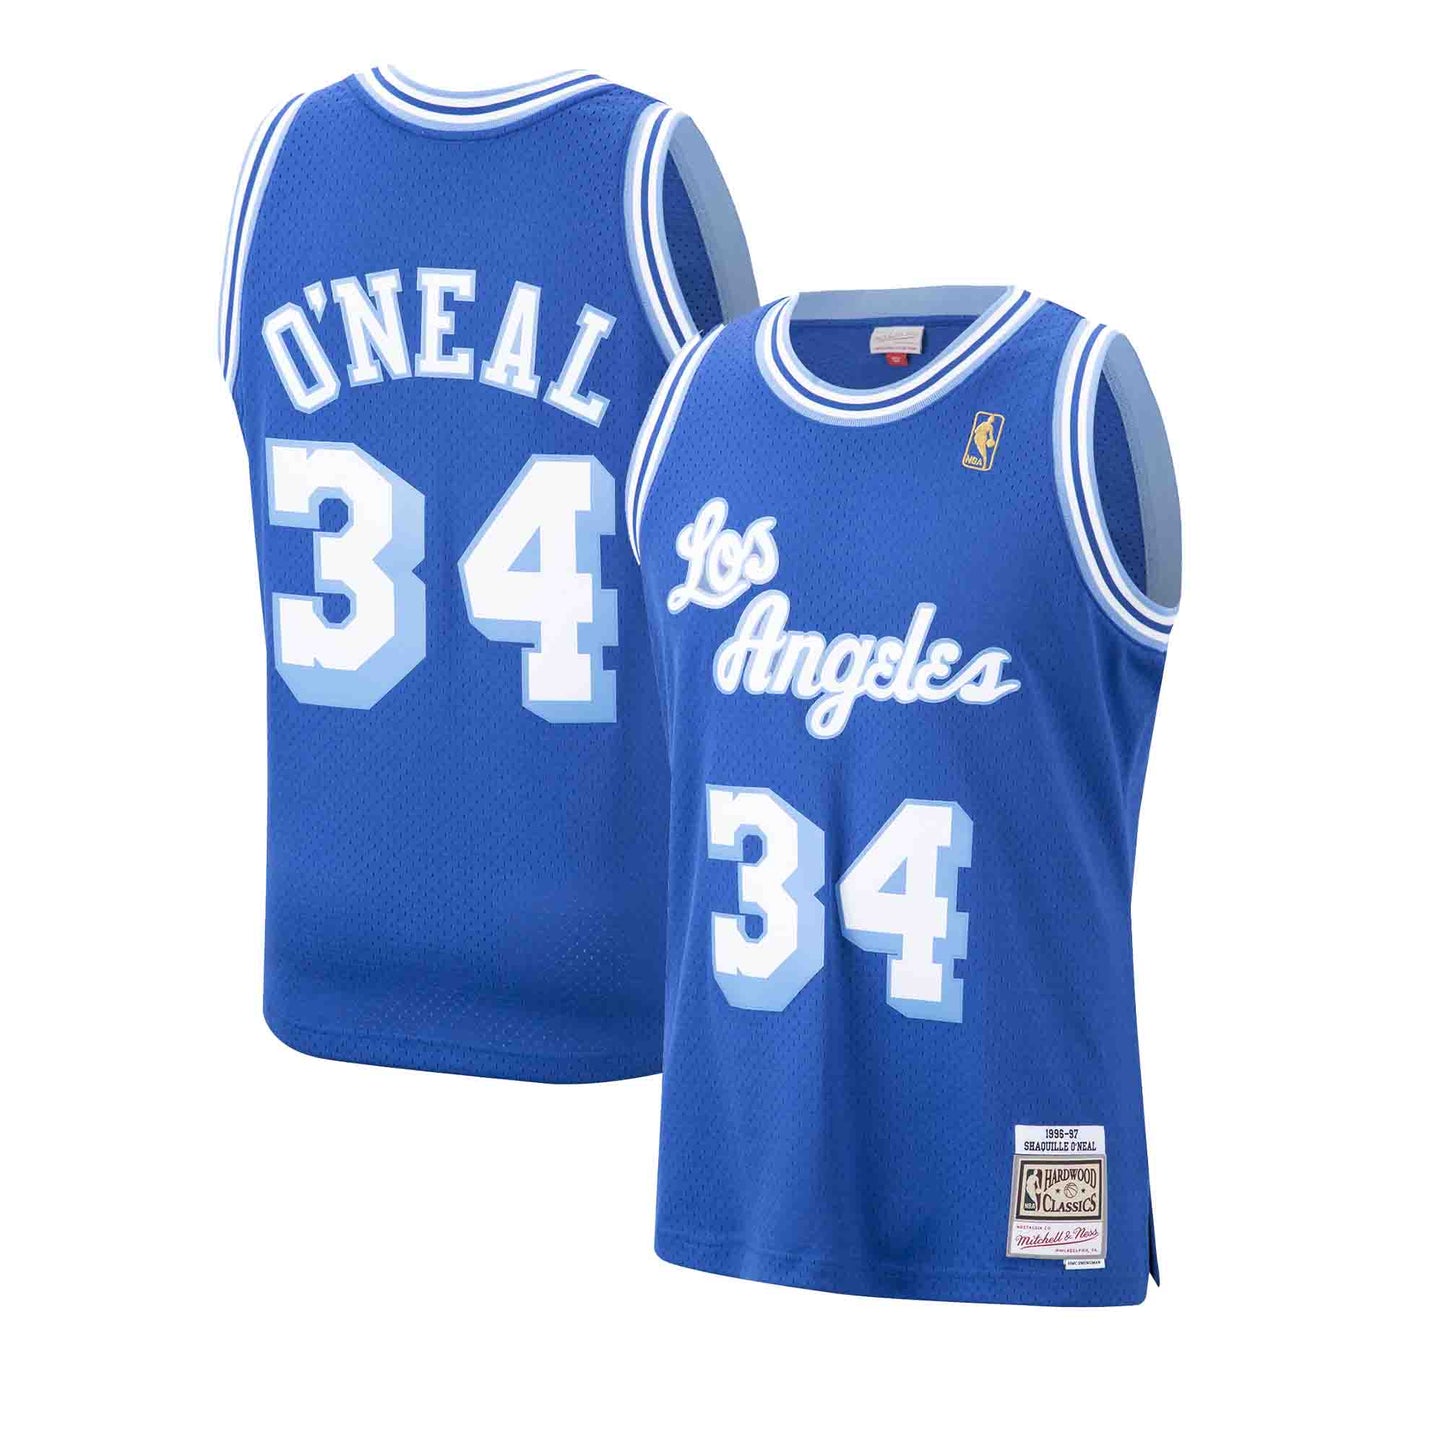 Mitchell & Ness NBA Swingman Jersey Los Angeles Lakers Alternate 1996-97  Shaquille O'Neal #34 Blue